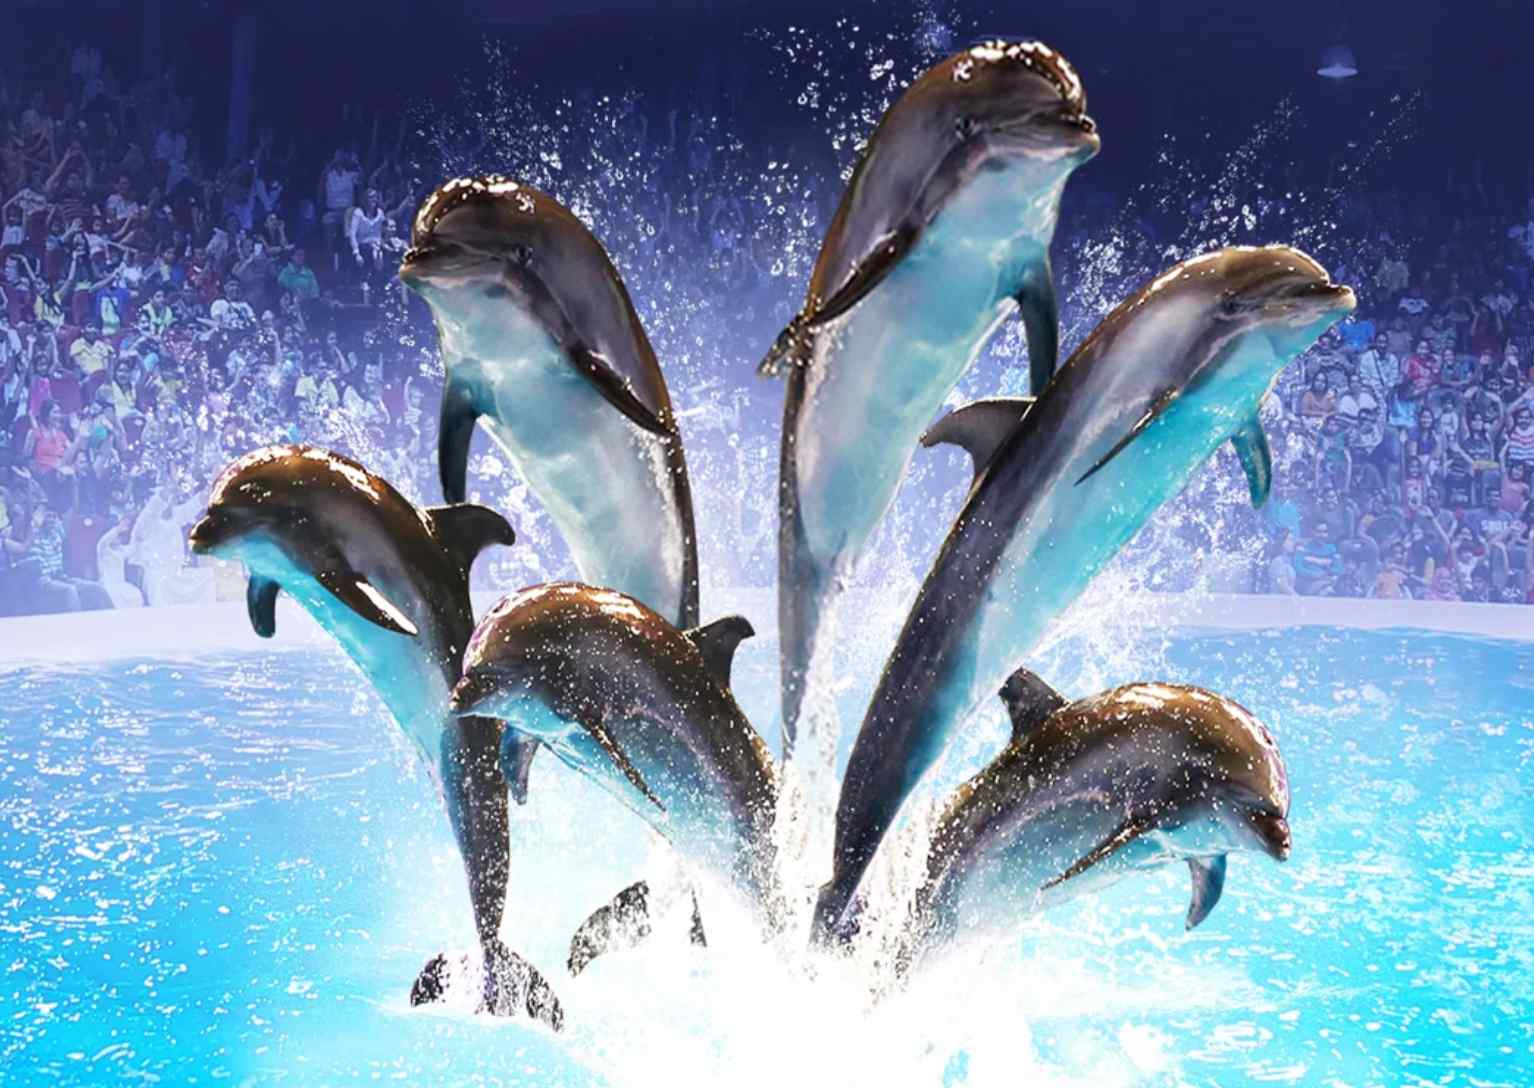 You can get Dubai dolphinarium tickets online in advance. In this article, we will discuss details of the dolphinarium park in Dubai City.